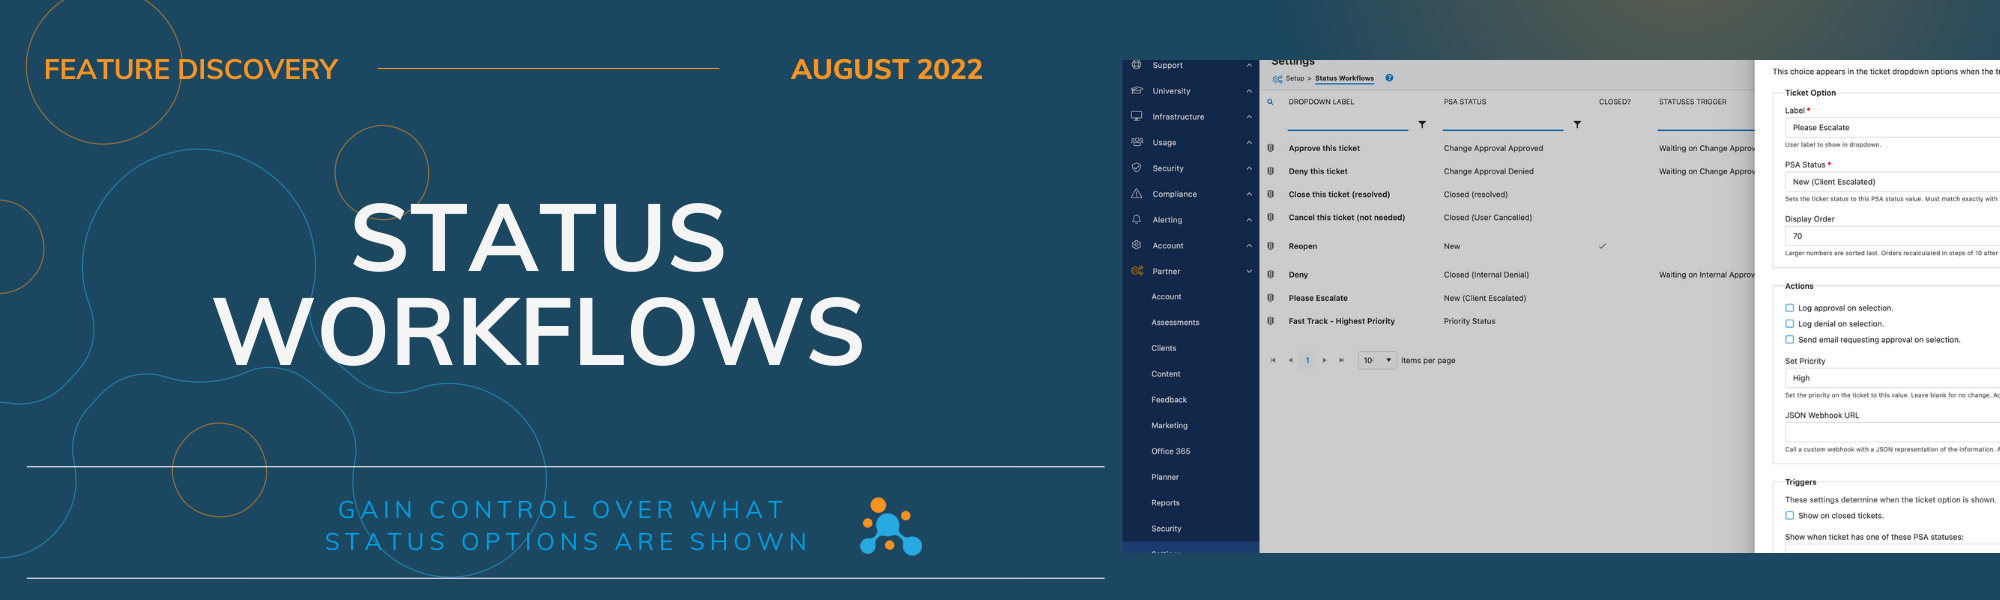 Feature Discovery: Status Workflows